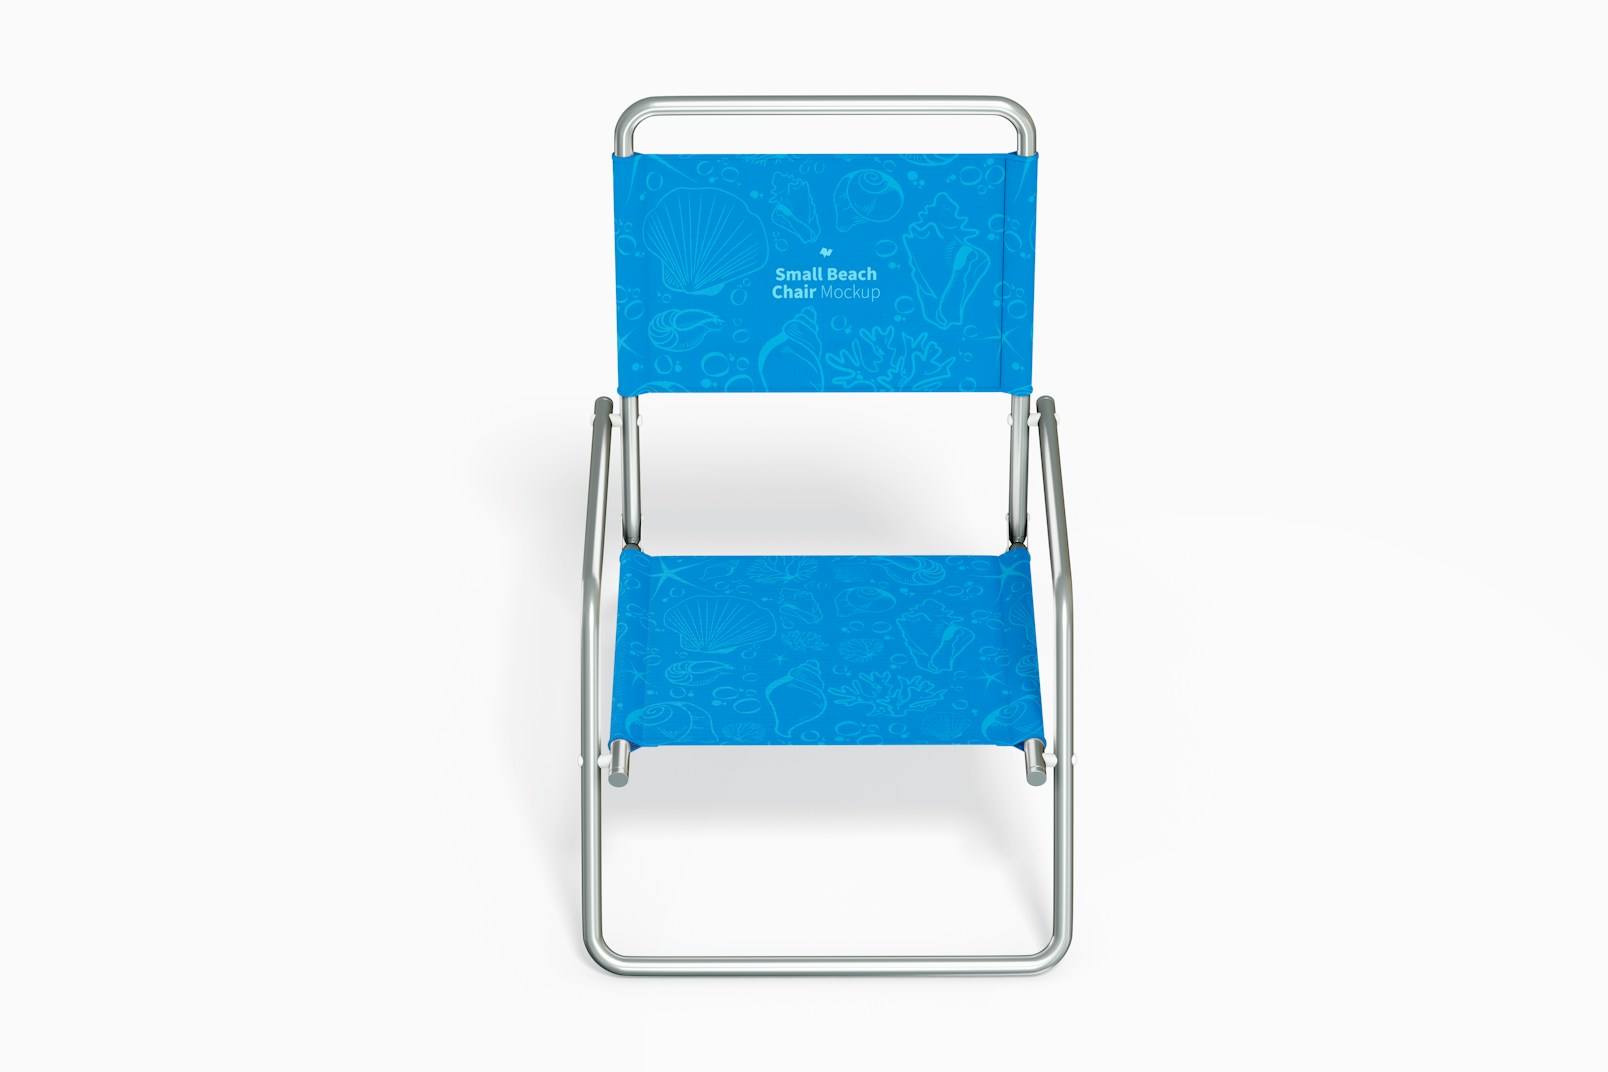 Small Beach Chair Mockup, Front View